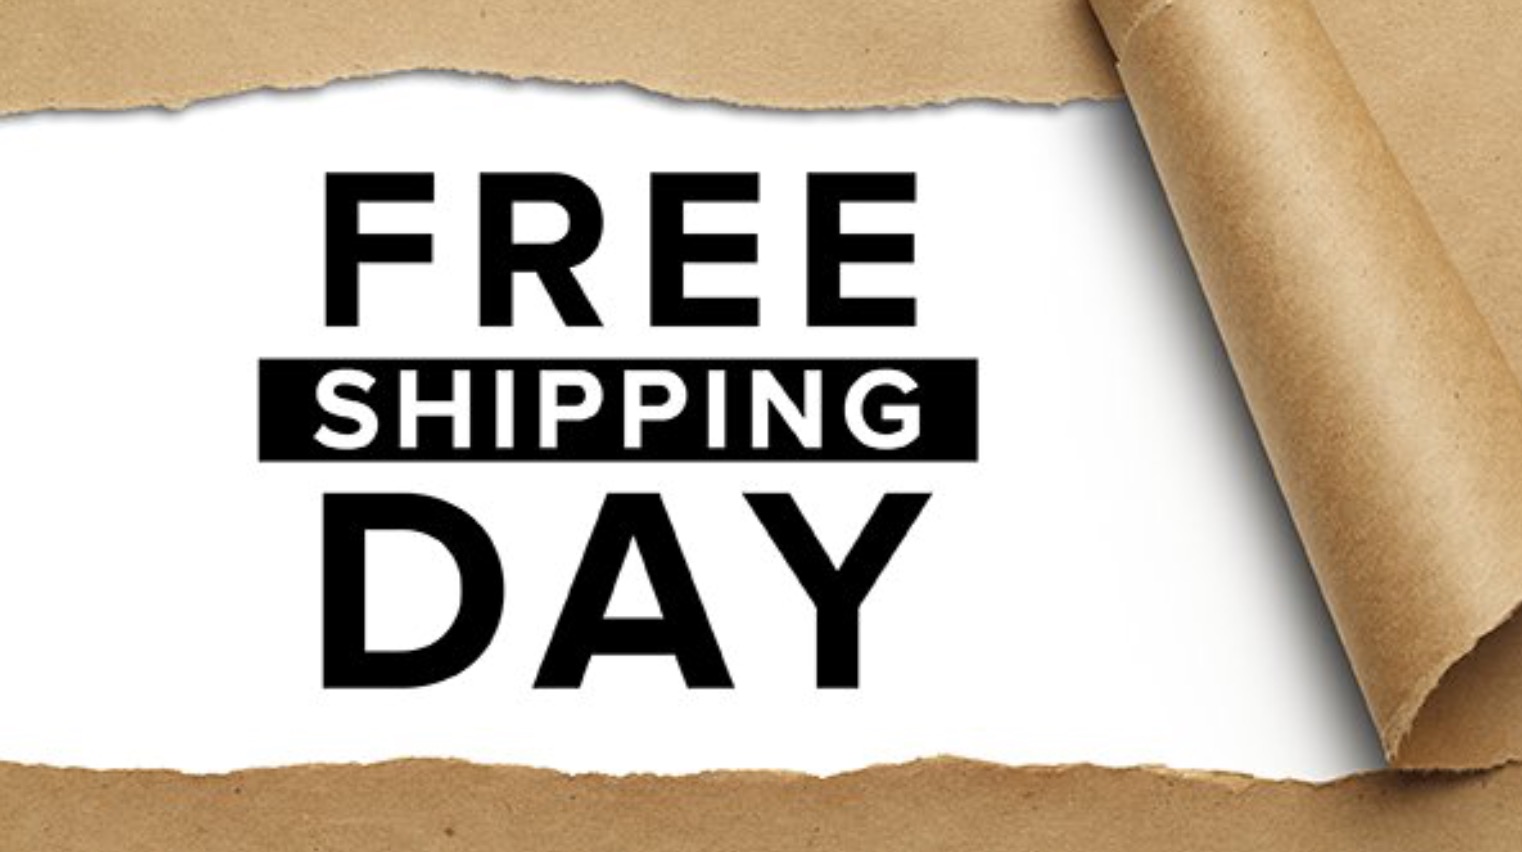 Get Free Shipping in Time for the Holidays on Free Shipping Day SHIP